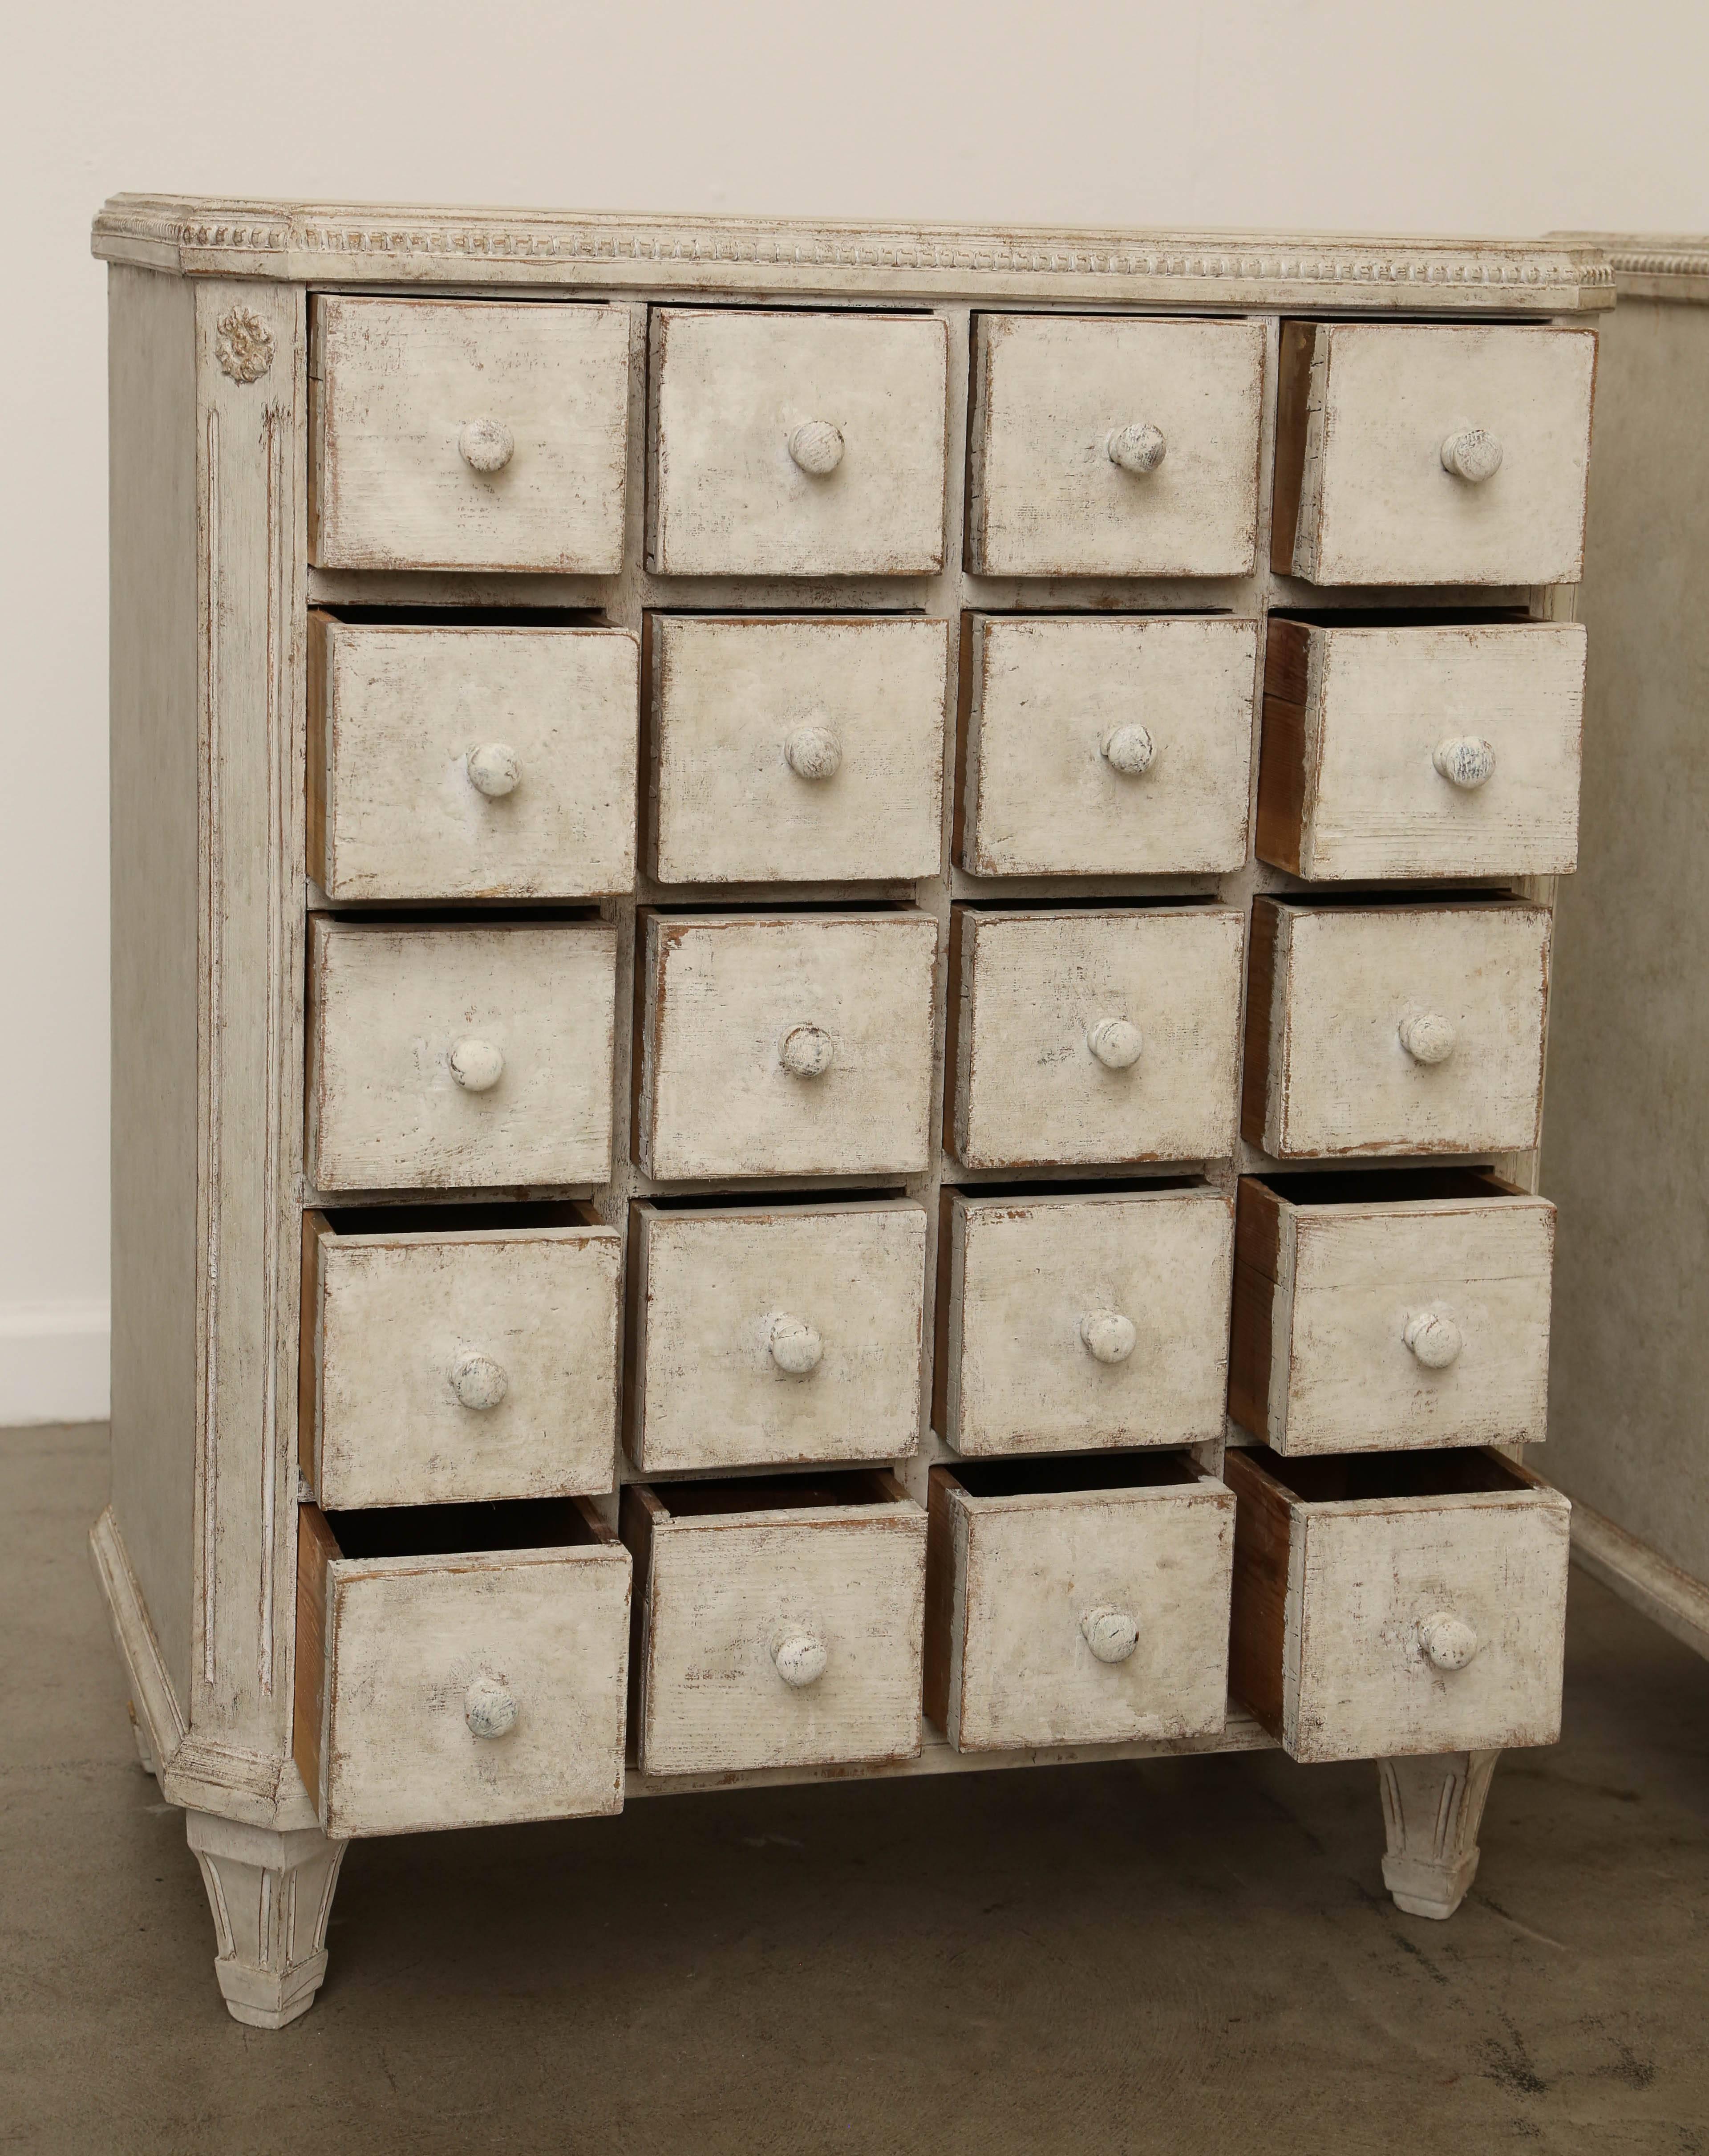 One antique Swedish Gustavian Style painted apothecary chest which is rare and unusual. Painted in Gustavian white with a subtle green undertone. Beaded border top. Distressed paint finish.
Slanted corners with rosettes and fluting with tapered